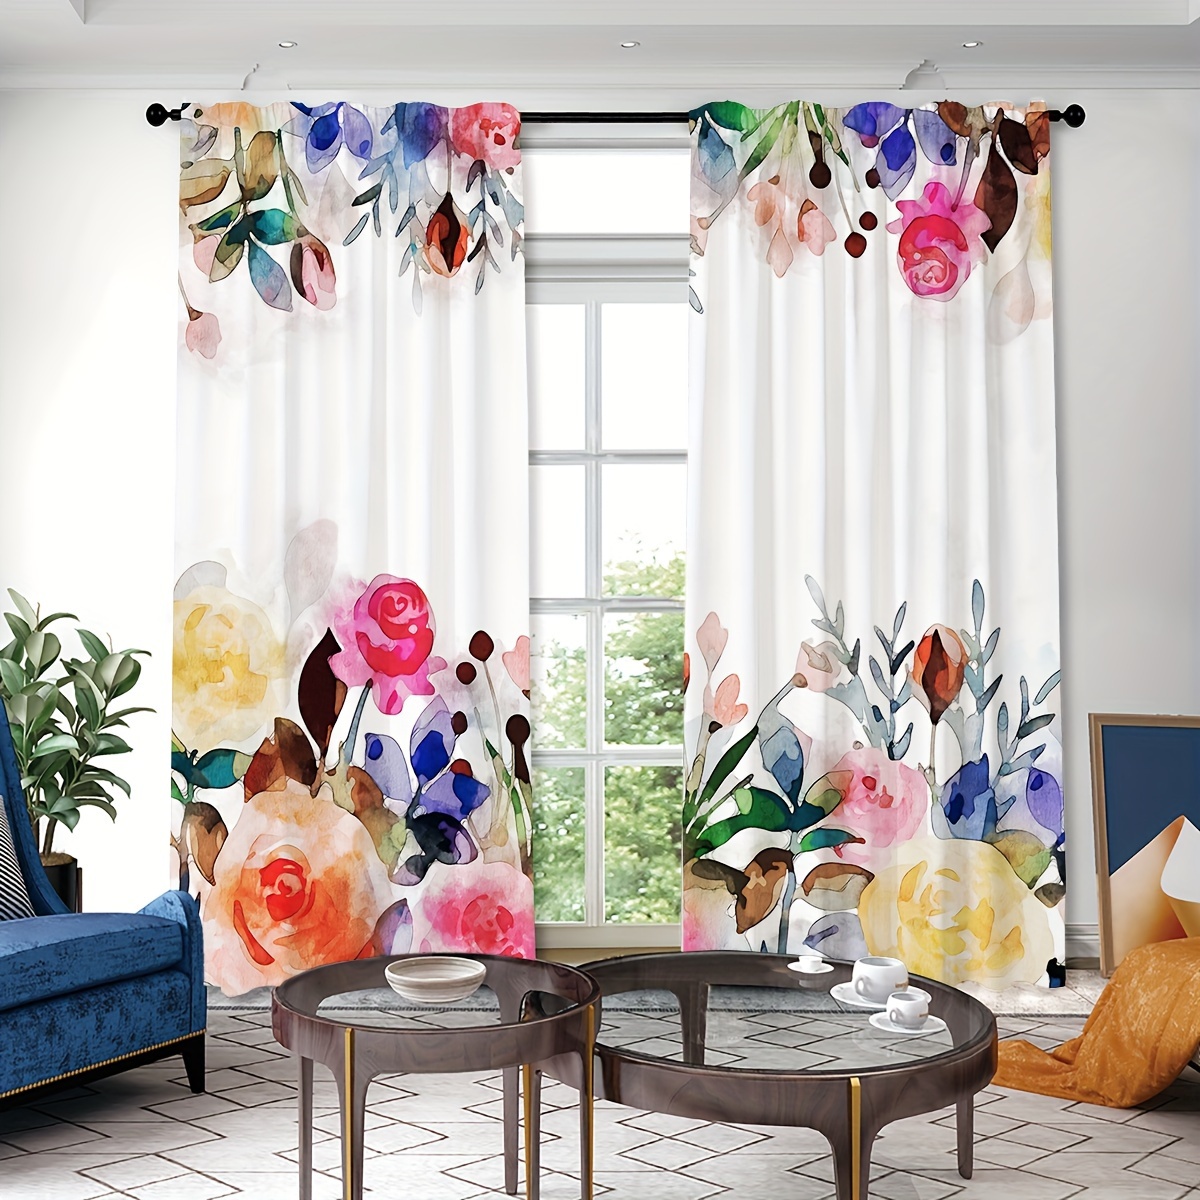 

2pcs, Beautiful Watercolor Rose Bouquet Pattern Printed Curtains, Rod Pocket Curtain, Suitable For Restaurants, Public Places, Living Rooms, Bedrooms, Offices, Study Rooms, Home Decoration